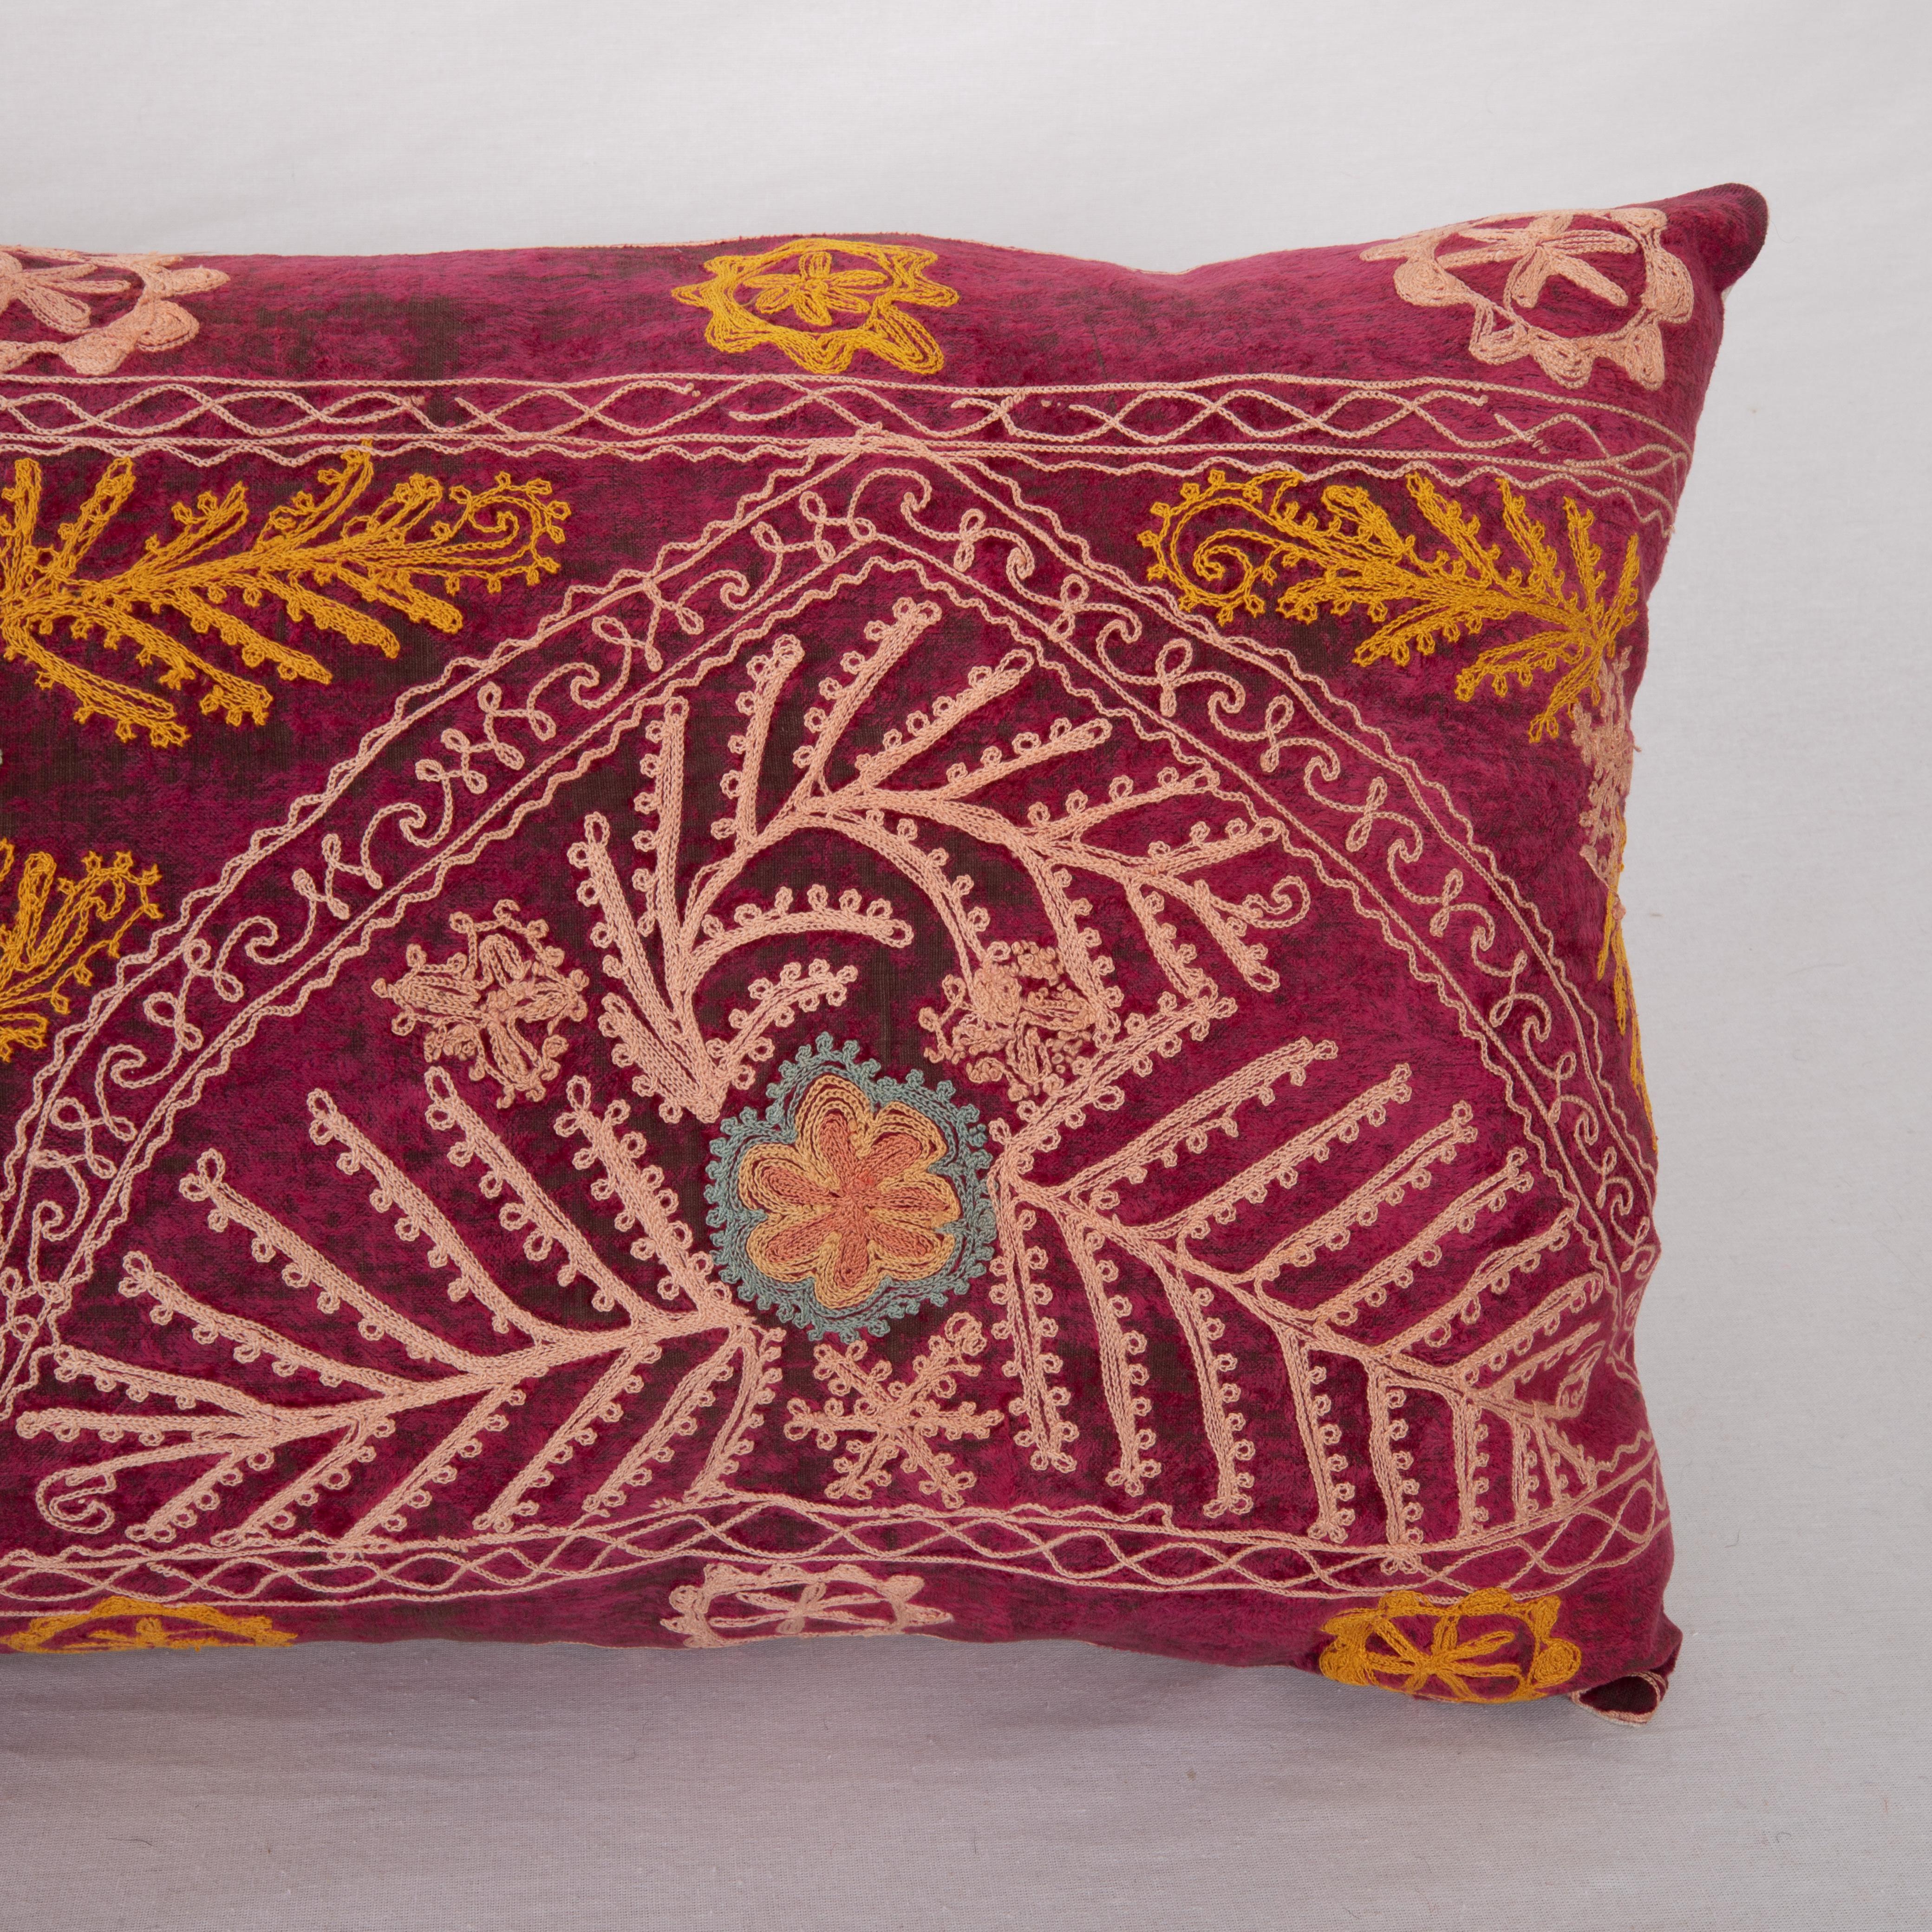 Suzani Pillow Case Made from a Vintage Velvet Ground Suzani, Mid-20th Century In Fair Condition For Sale In Istanbul, TR